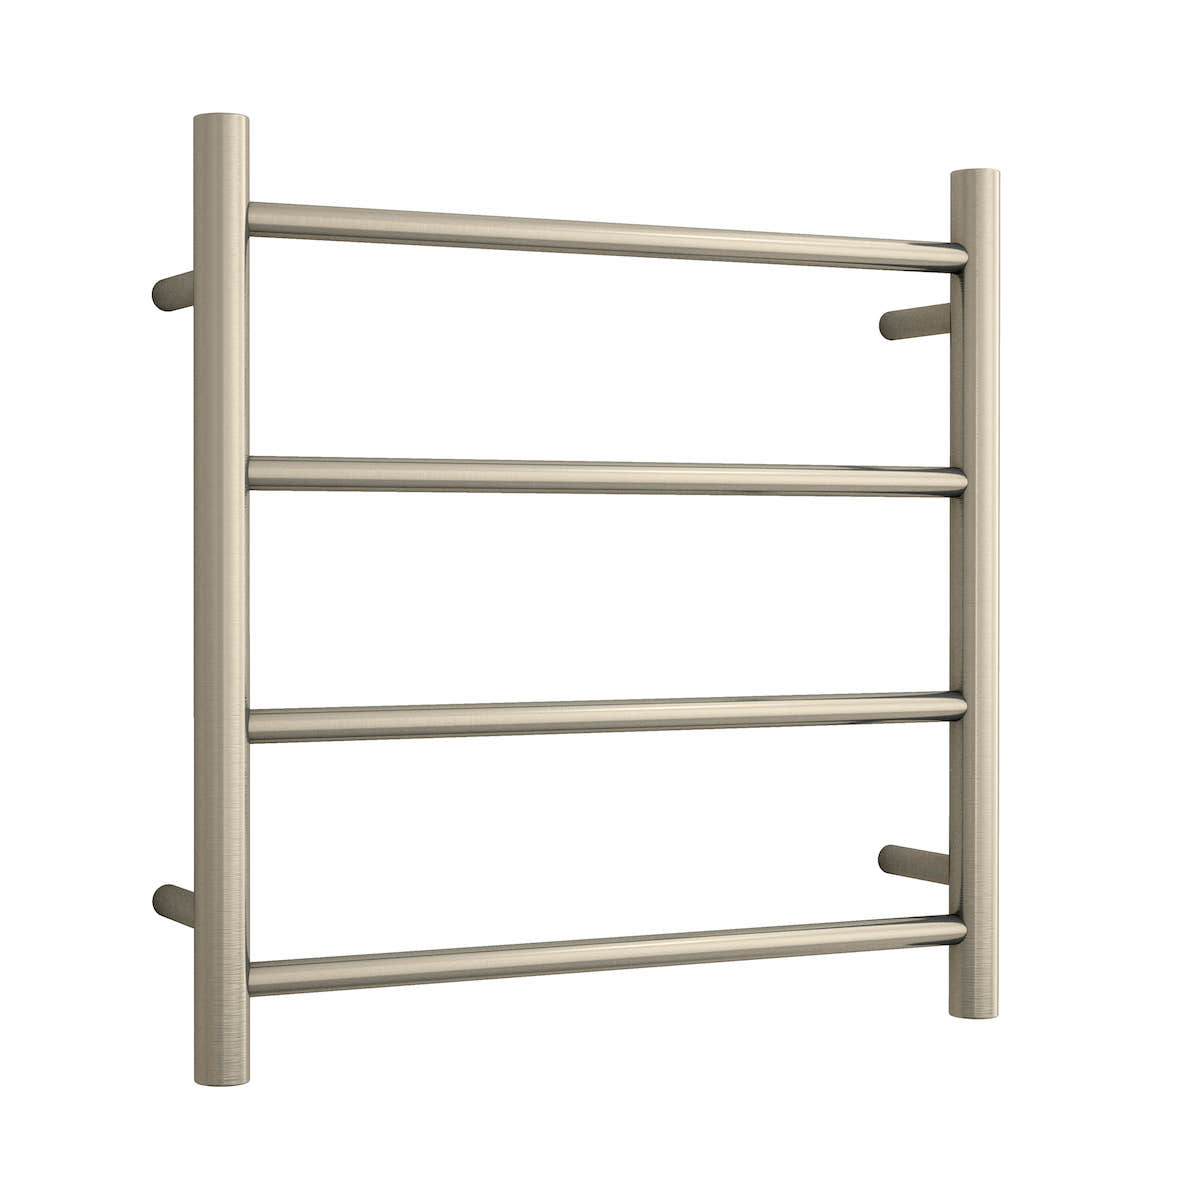 BRUSHED NICKEL finish heated towel ladder from Infinity Plus bathrooms deliver AU wide